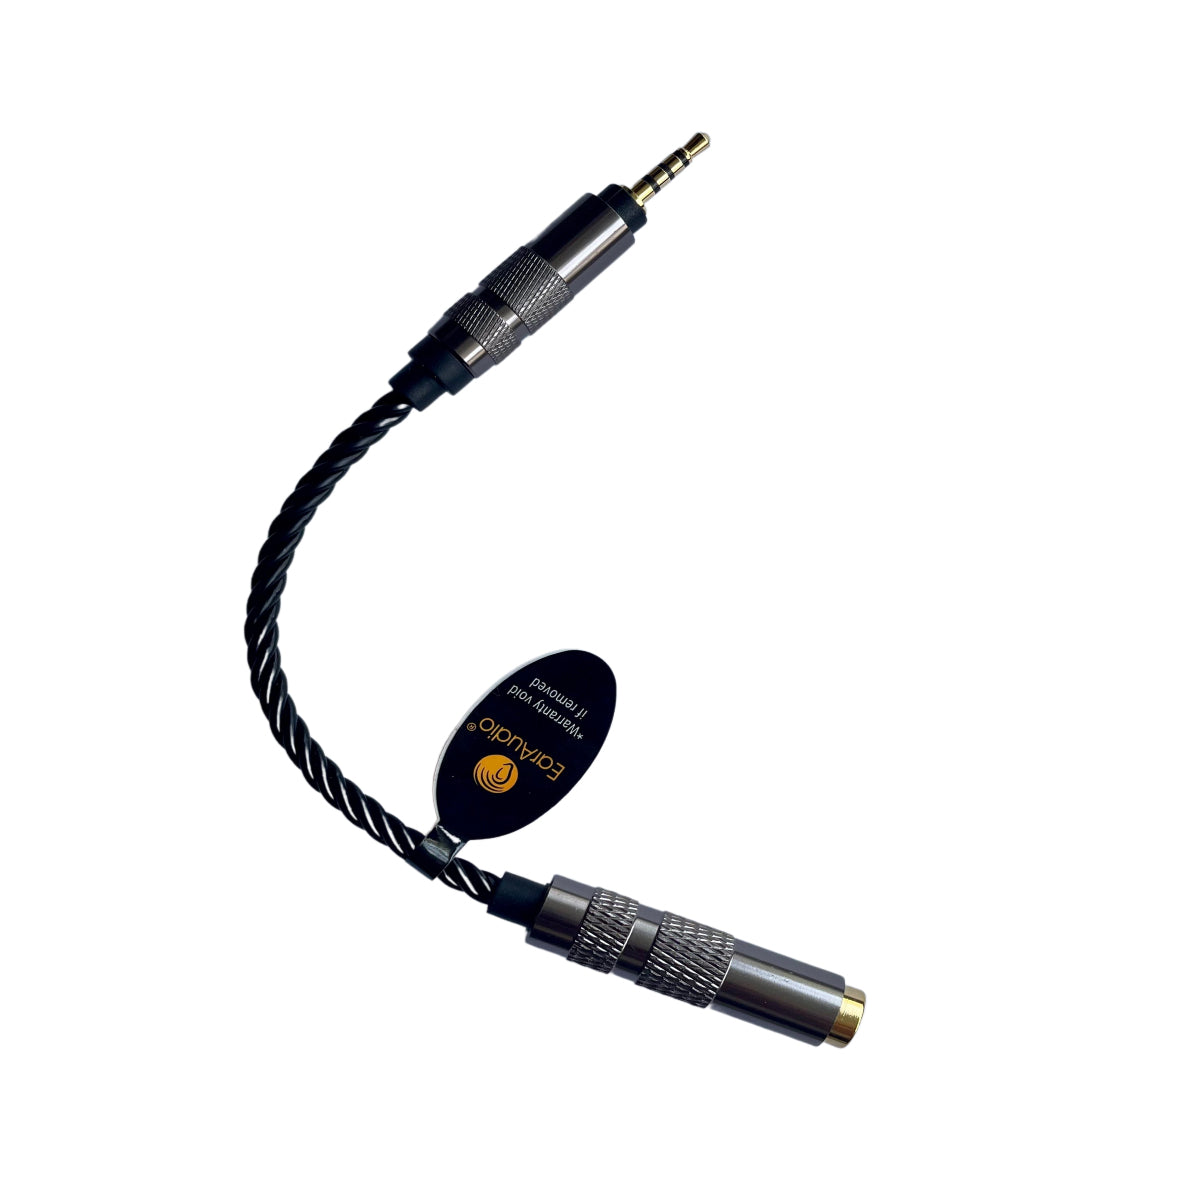 EarAudio 2.5mm male to 4.4mm female Adapter Cable